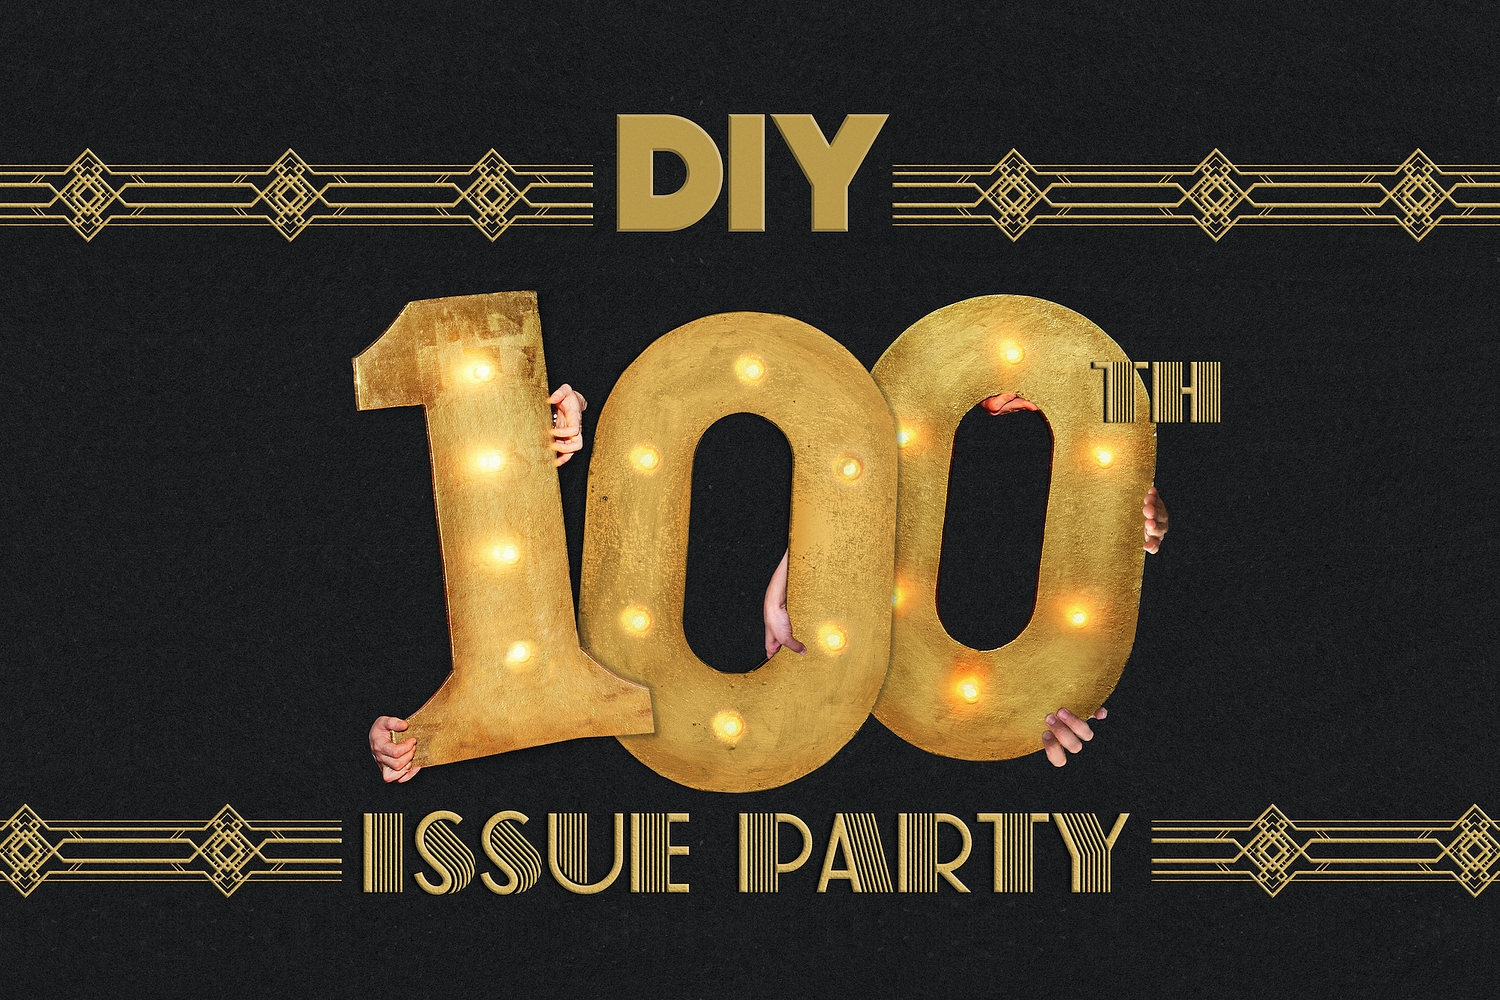 Matt Maltese, Black Honey and Spector to play DIY’s 100th issue party